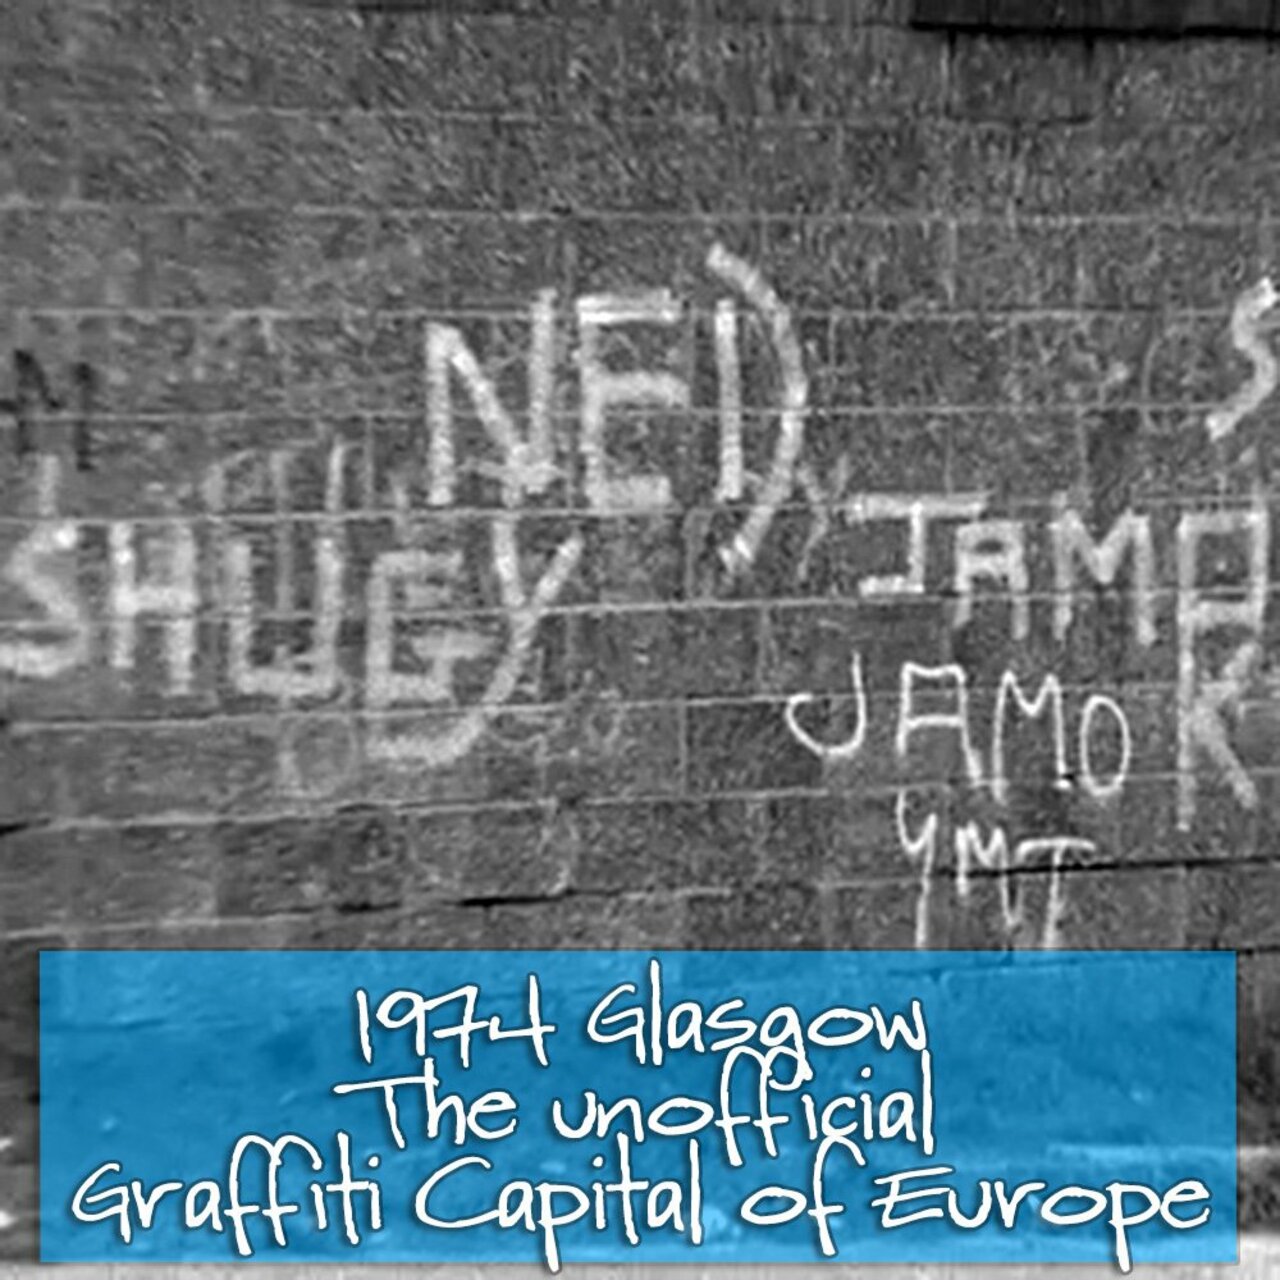 #TBT 1974 - when Glasgow was the unofficial #Graffiti Capital of Europe...@BBCArchive / #StreetArt https://t.co/zOFvfzBd32